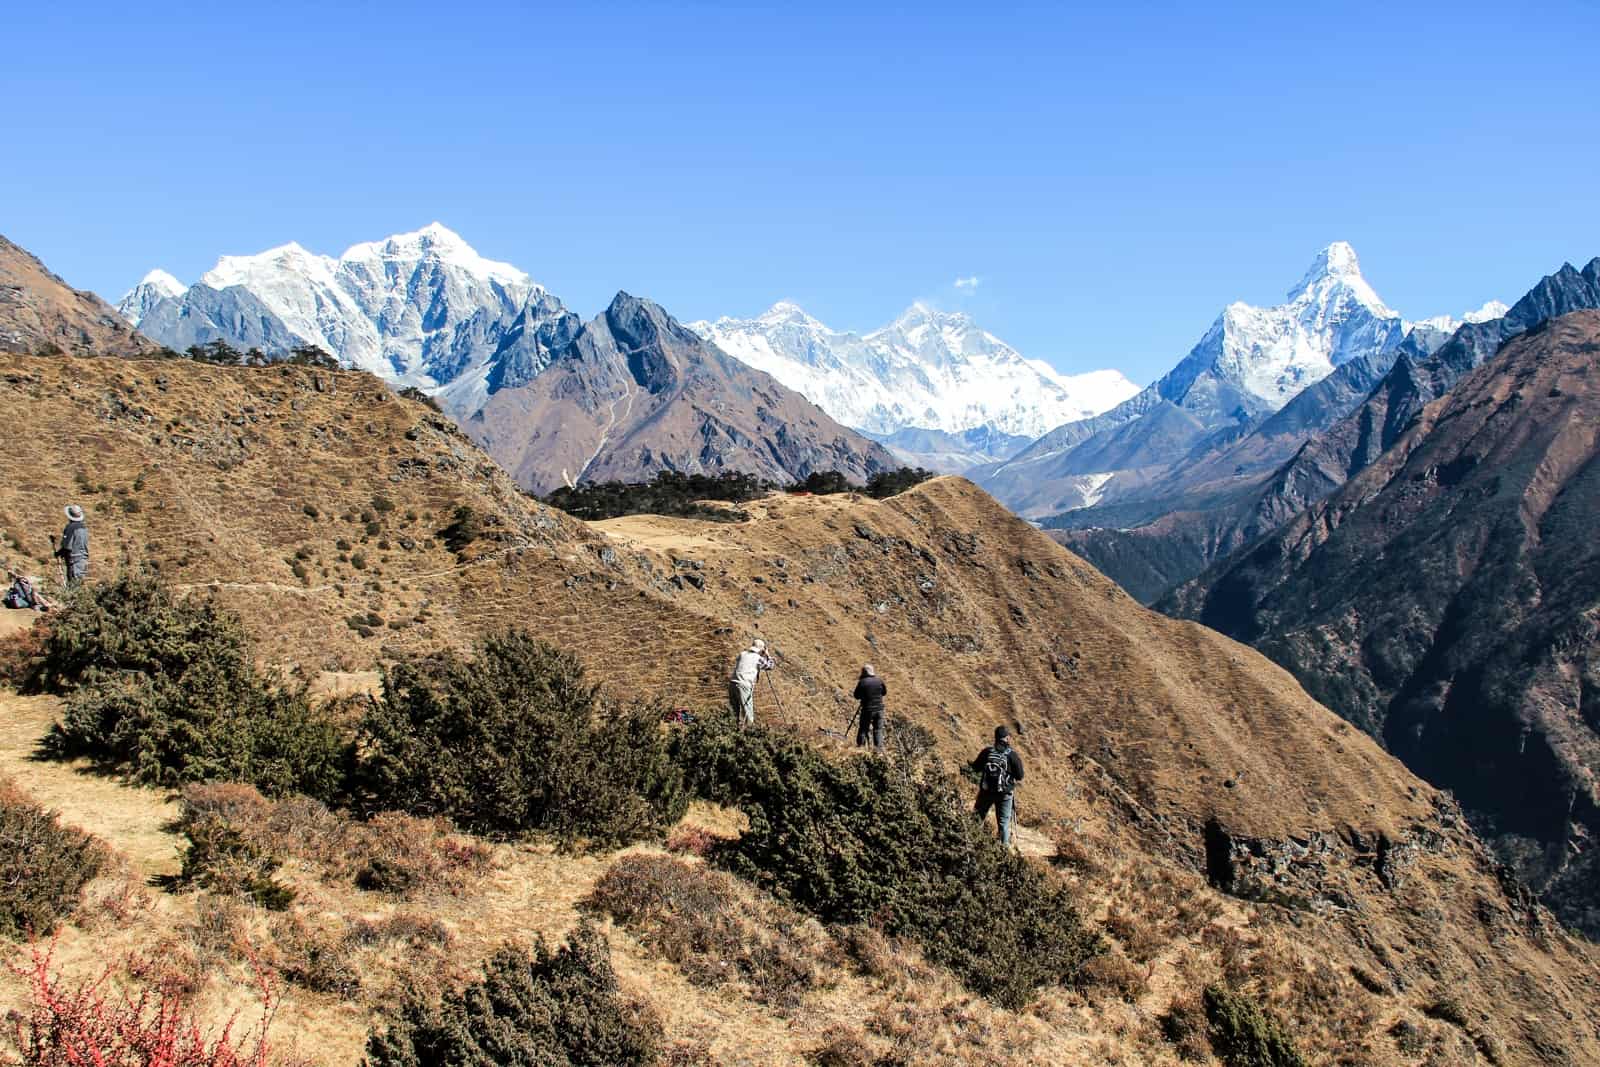 A small group of trekkers climbing to a higher altitude on golden mounds, on the Everest Base Camp trek. Three men can be seen in view taking photographs of the mountain range ahead.